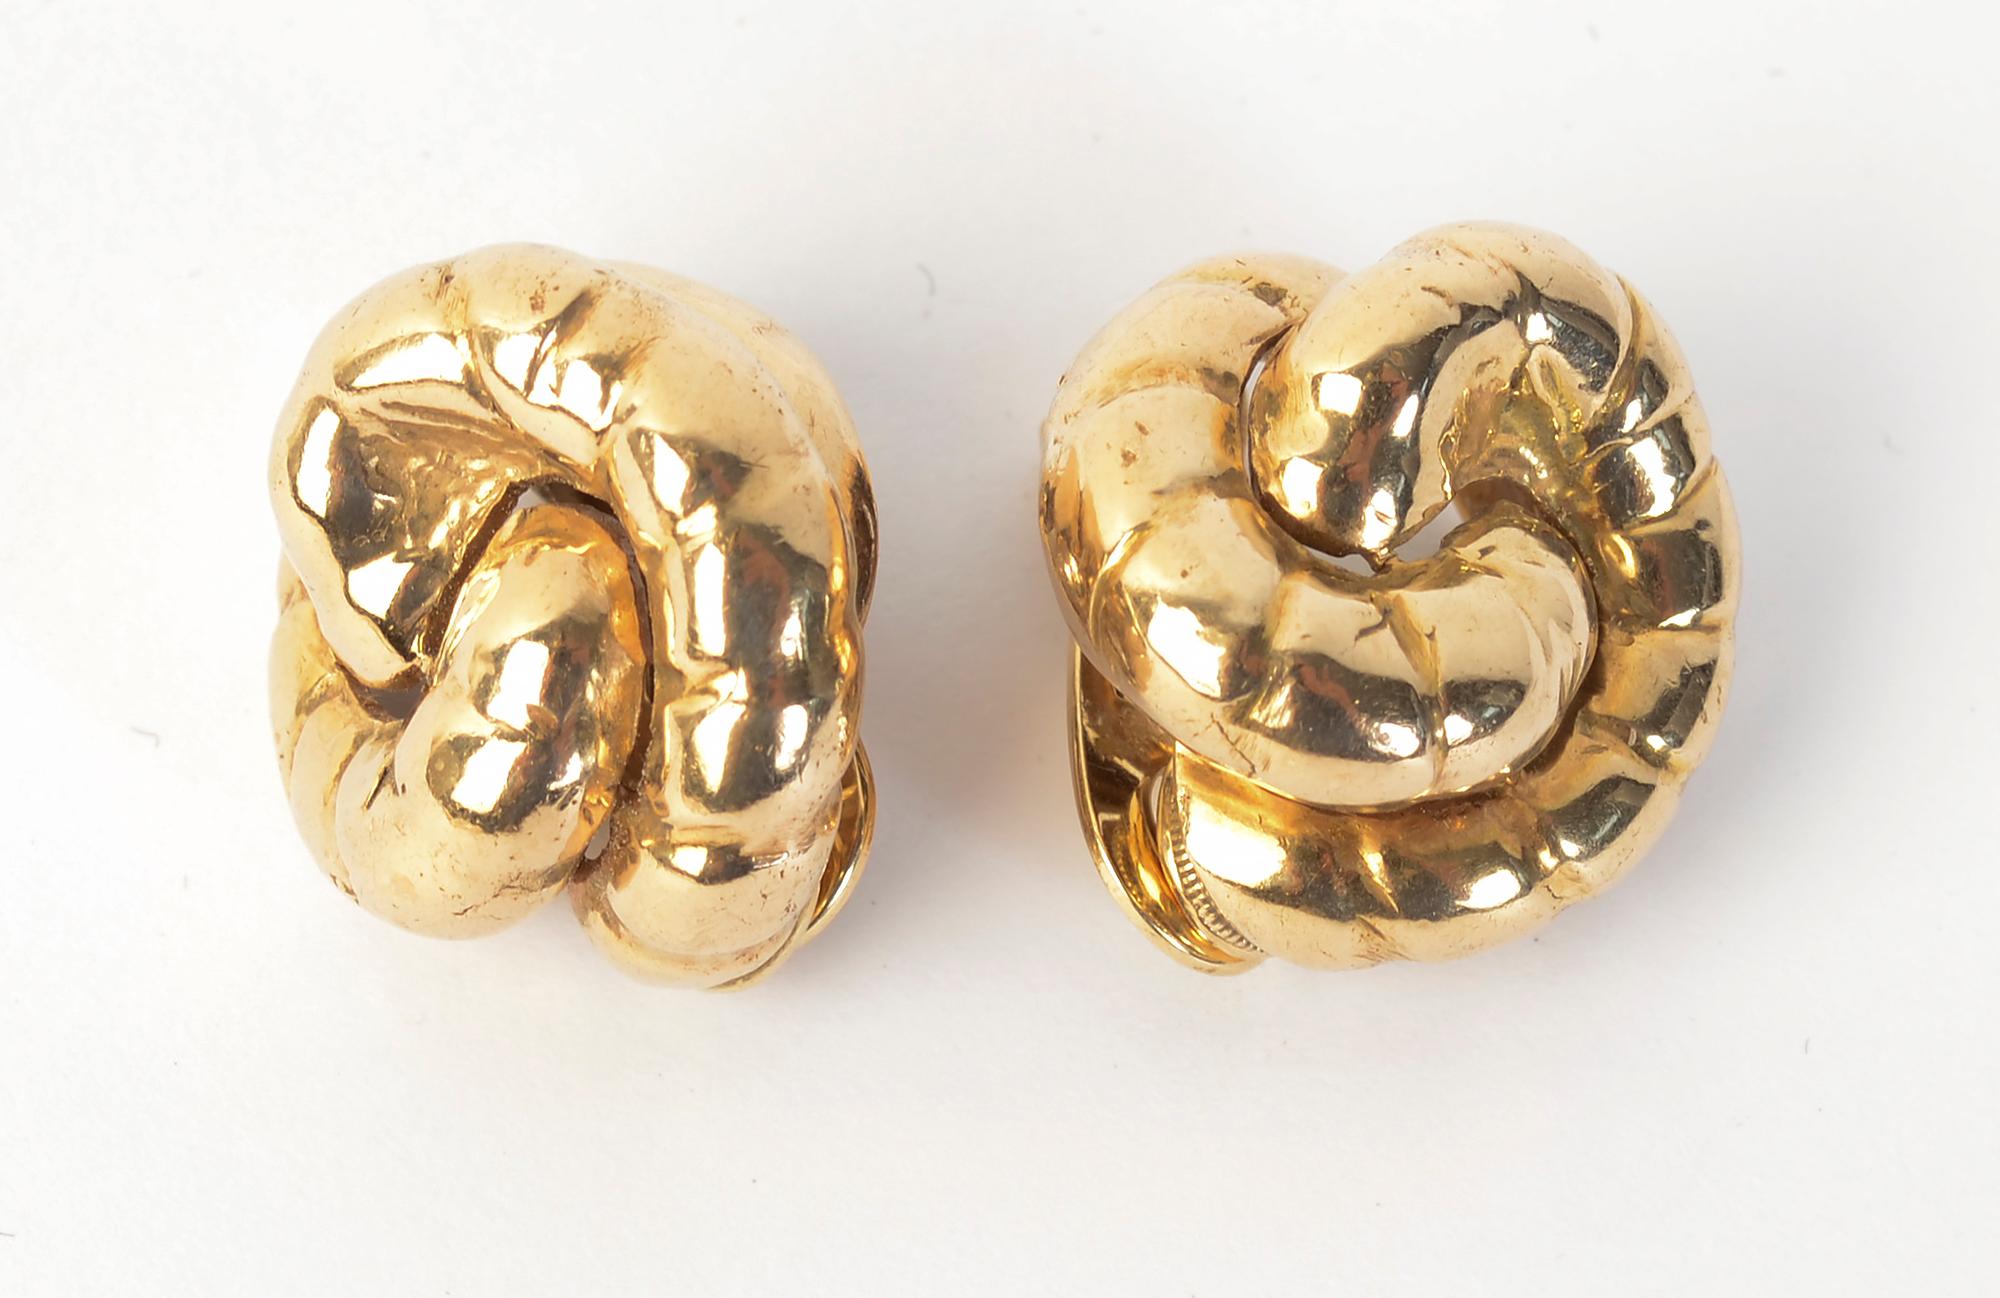 Two half circles hug each other in these 14 karat gold earrings by Seaman Schepps. Each half circle has several striations for a bit of texture.
The earrings have clip backs that can be converted to posts. Schepps worked in 14 karat gold until the